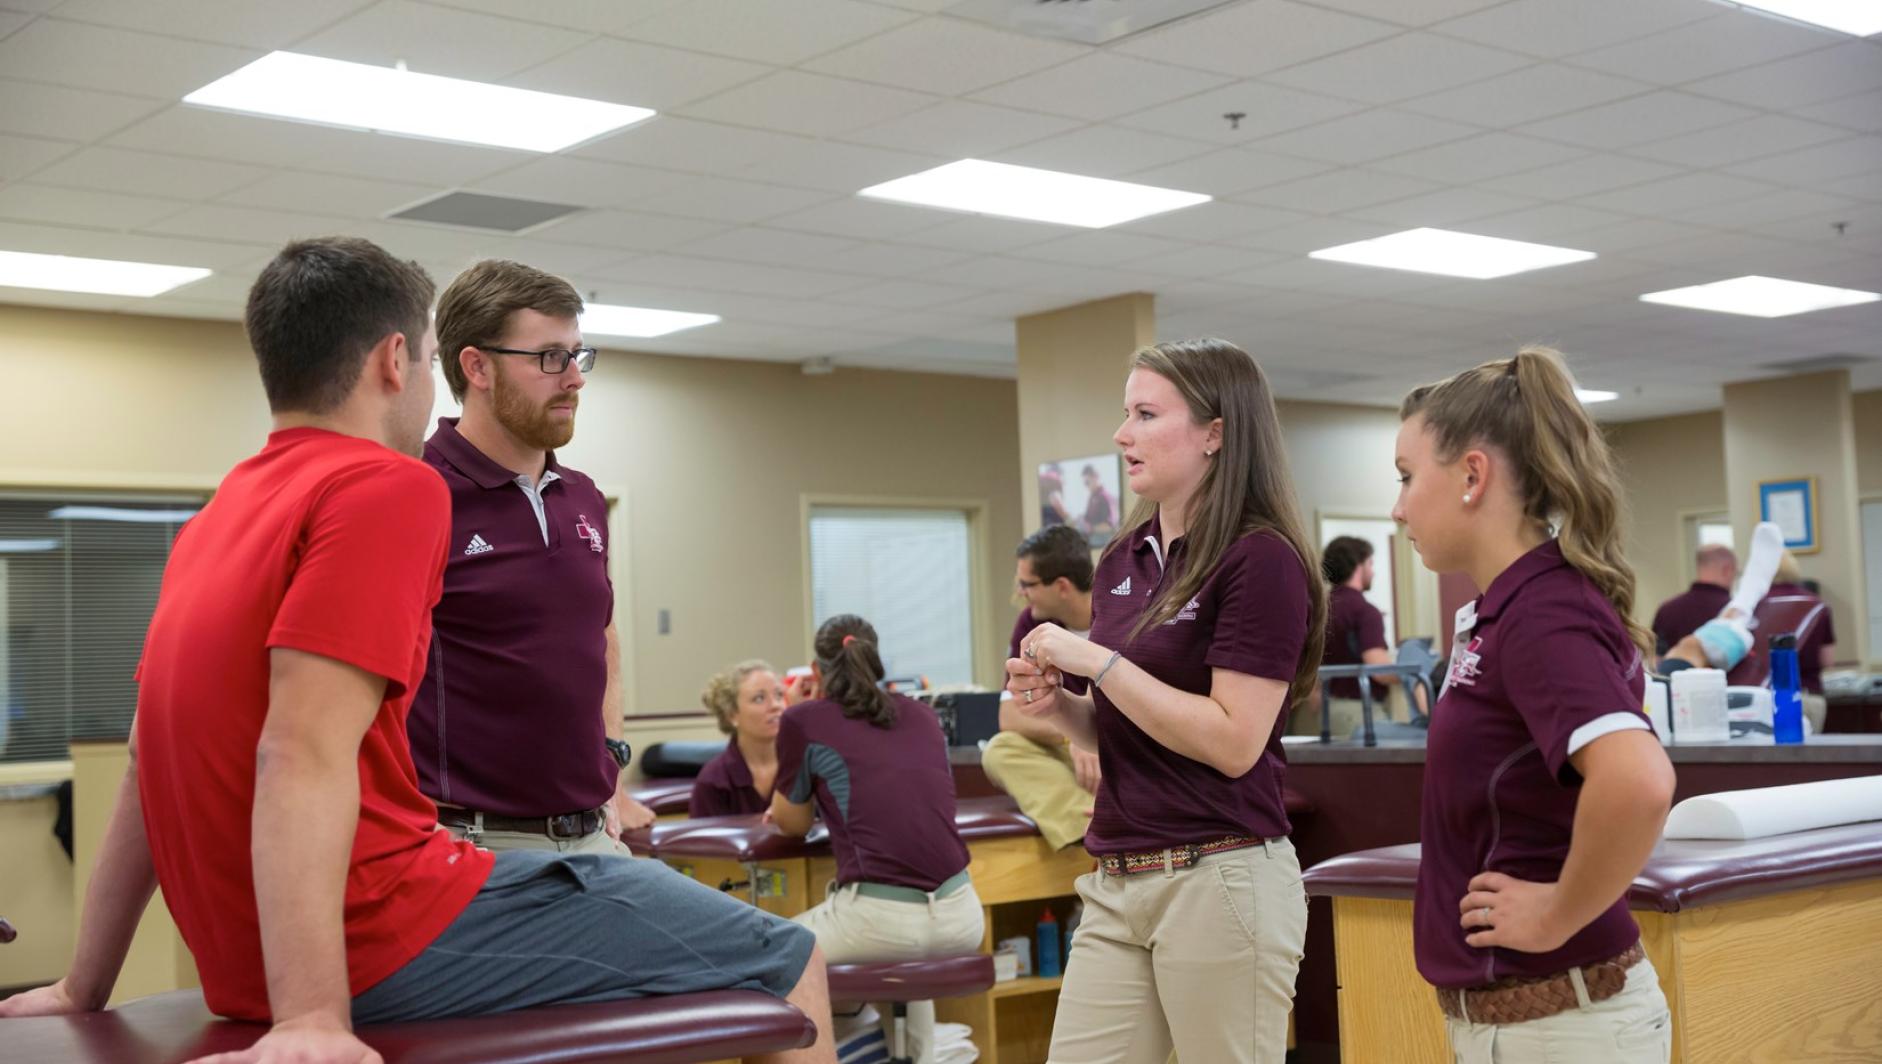 Three athletic training students consult with a client in the athletic training facility